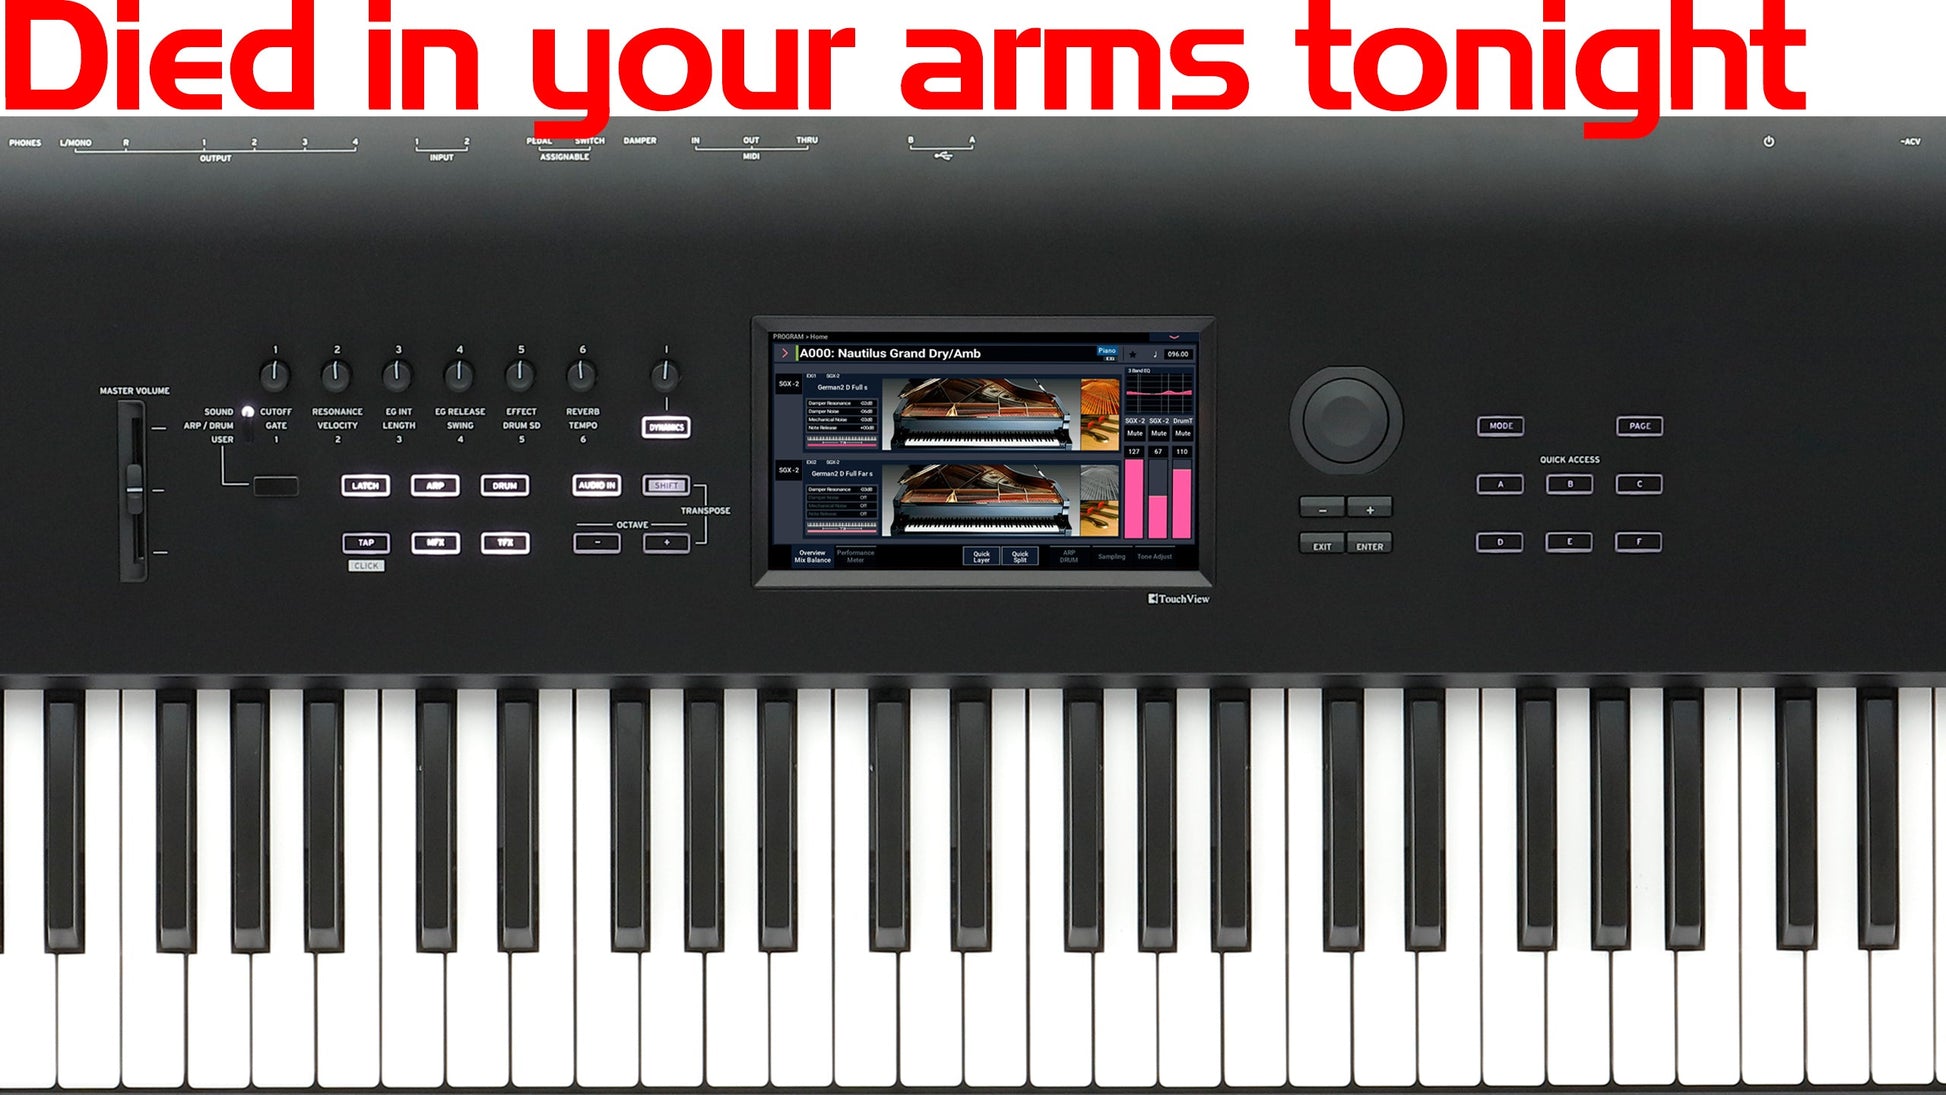 Korg Nautilus Coversound - Died in your arms tonight - Thorsten Hillmann Keyboard-Sounds